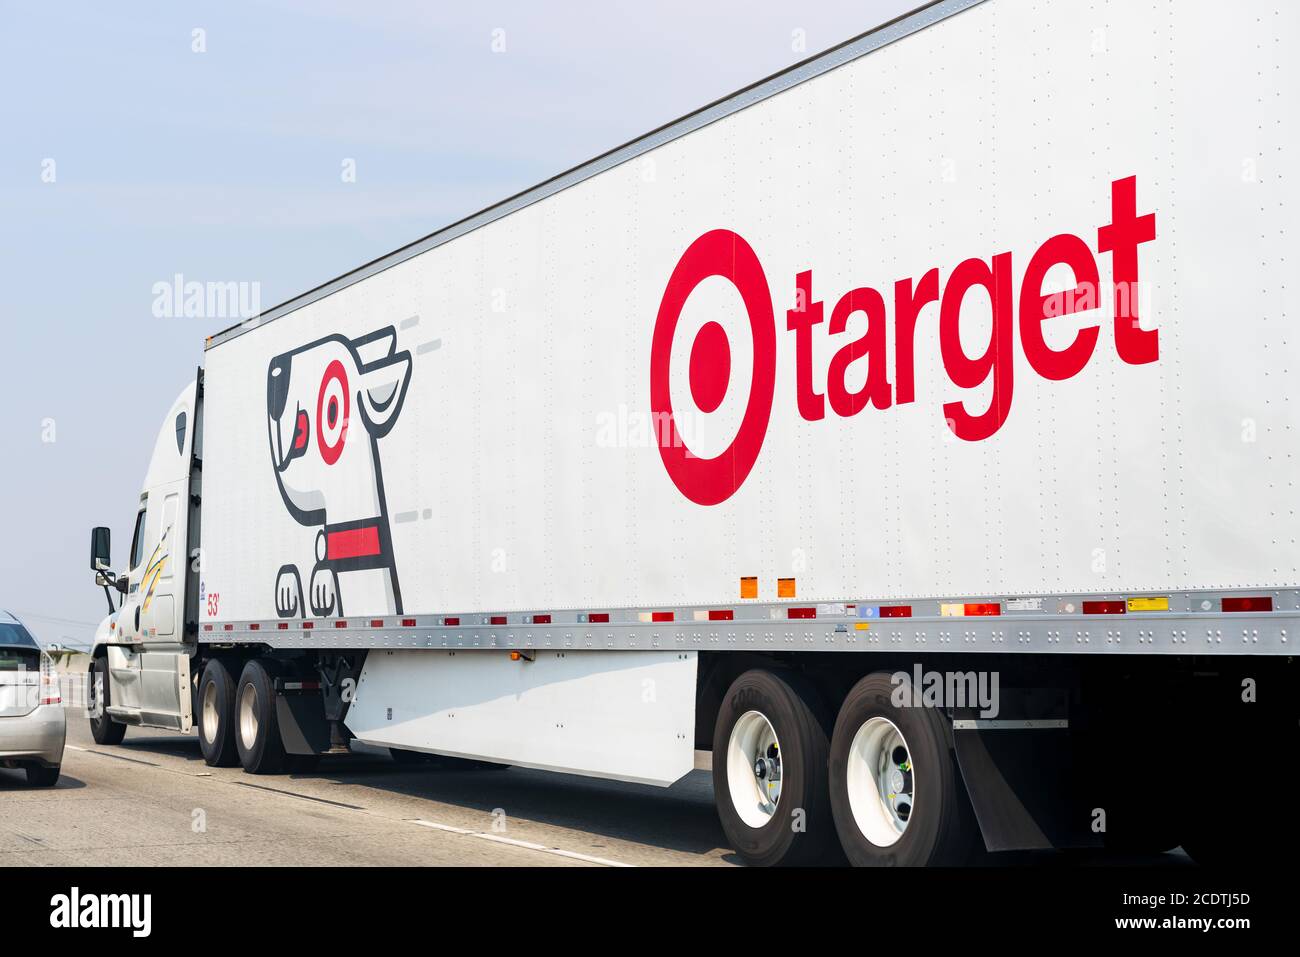 Aug 22, 2020 Walnut Creek / CA / USA - Target delivery truck